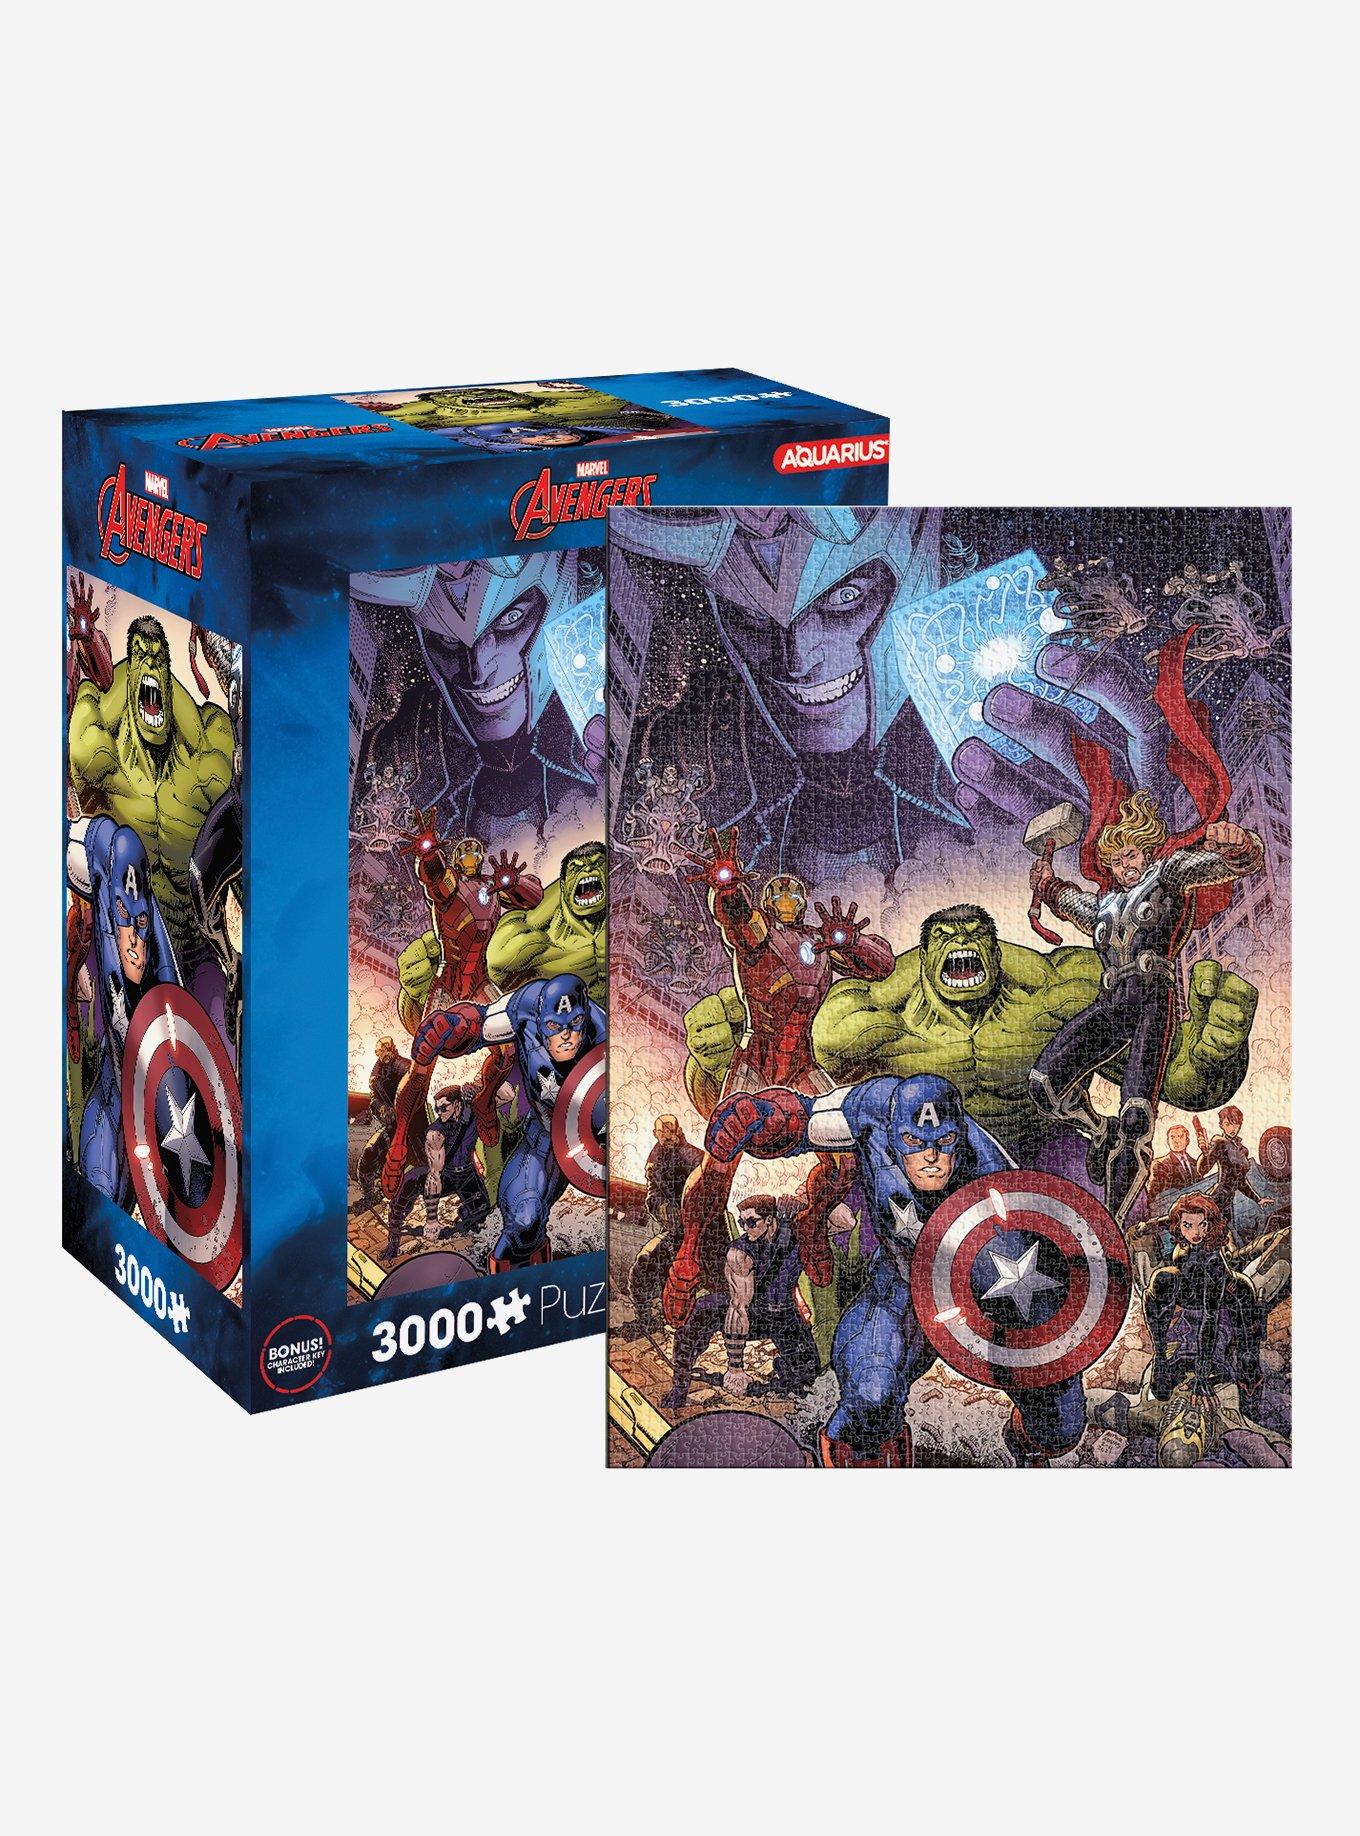 Marvel 500-Piece Puzzle Set of 3 - Entertainment Earth